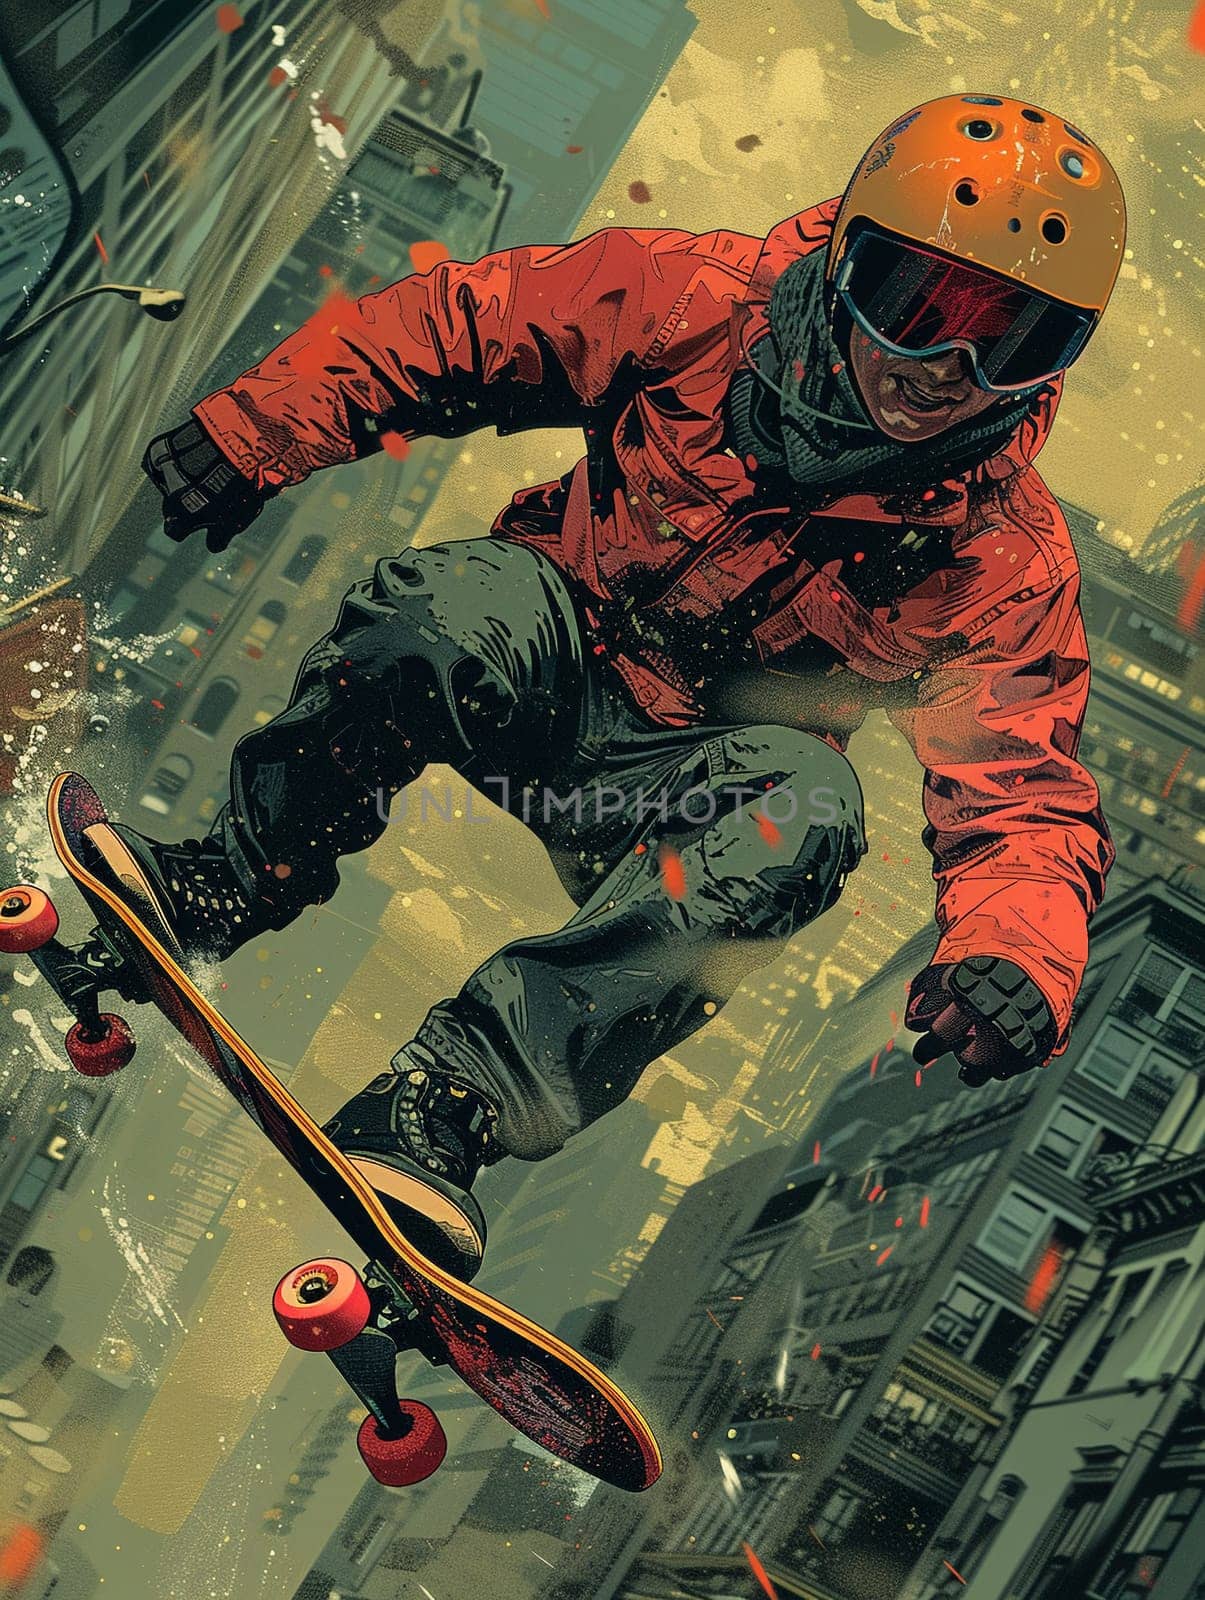 Skateboard descent created with dynamic lines and a sense of gravity in an action-packed comic style.